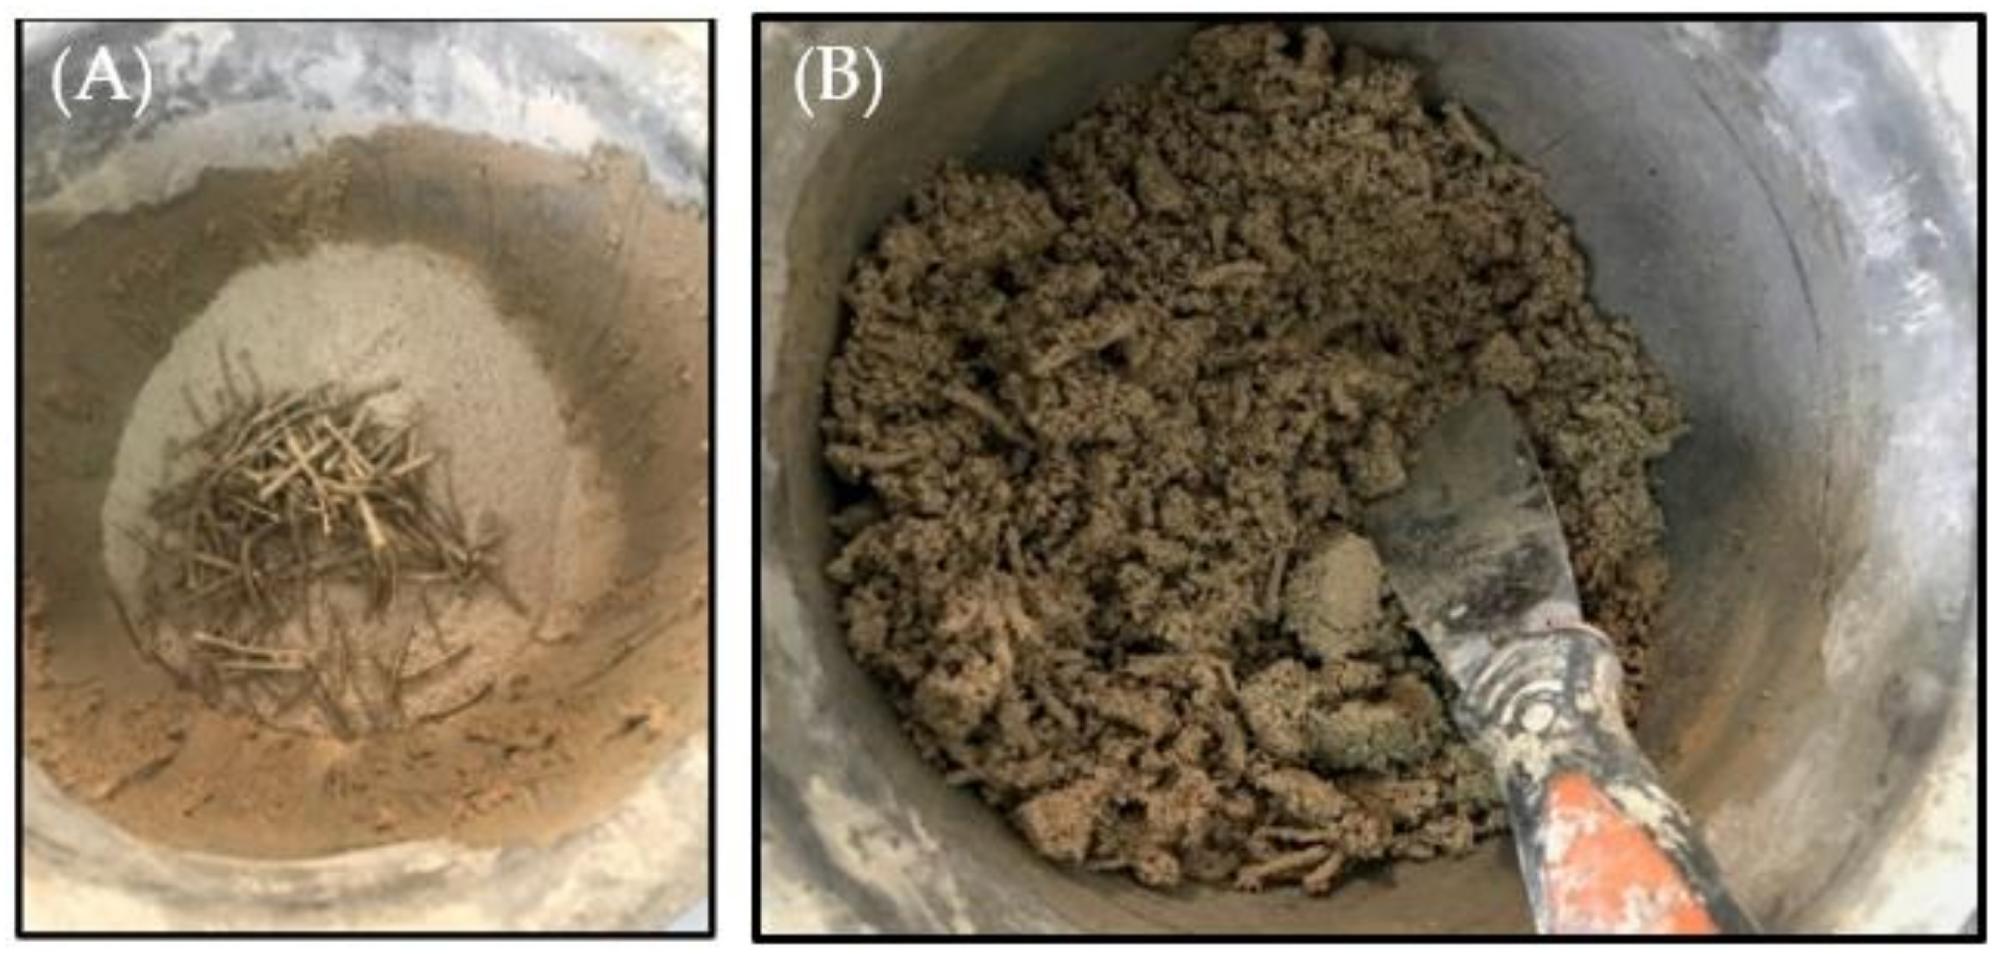 Example of a 3% fiber-reinforced lime mortar before (A) and after (B) blending.